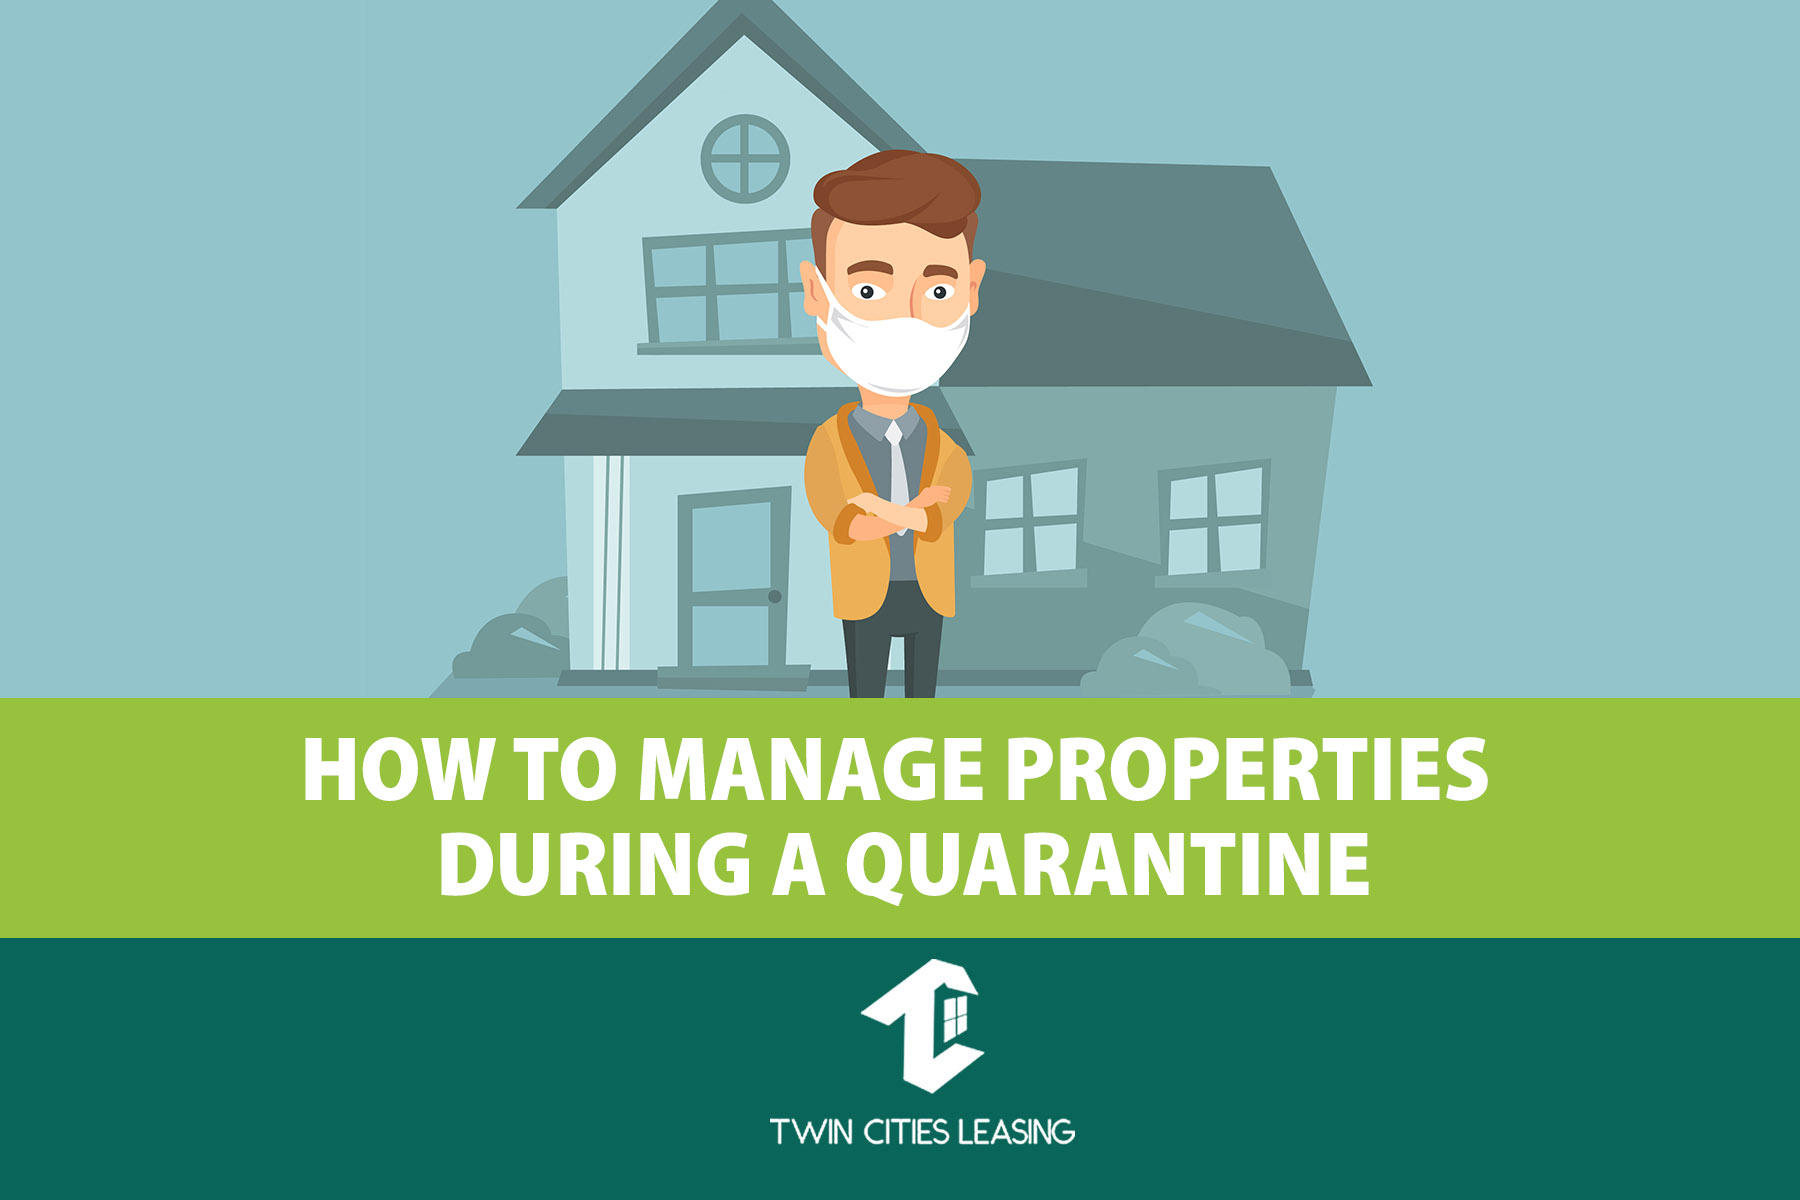 How to Manage Properties During a Quarantine